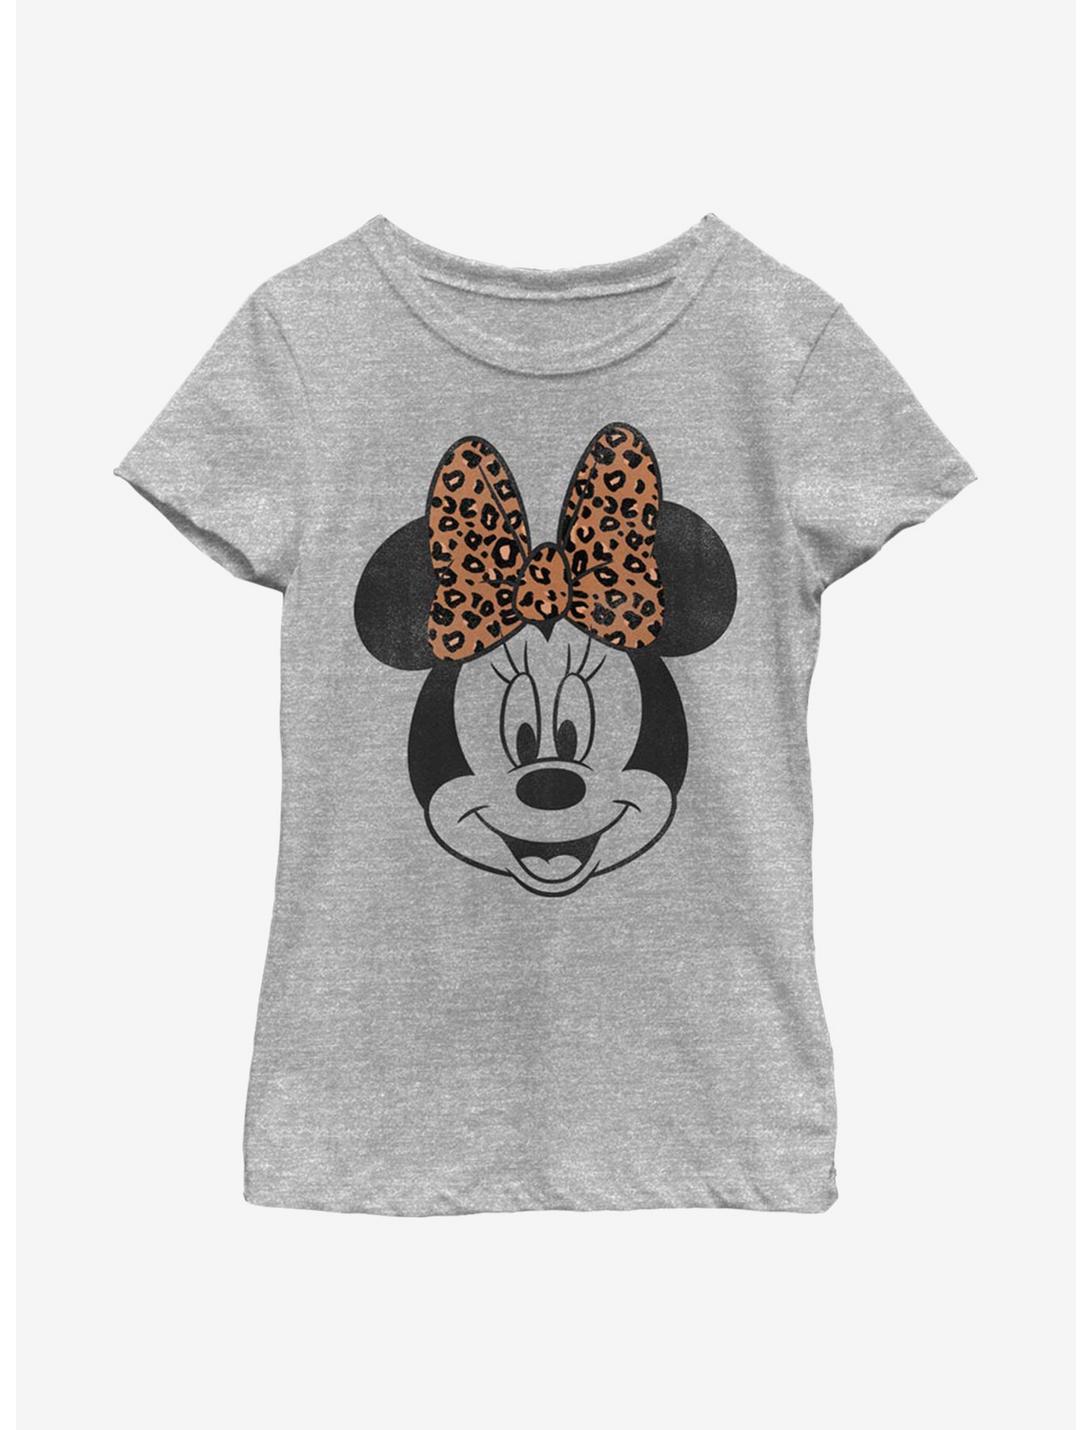 Disney Mickey Mouse Modern Minnie Face Leopard Youth Girls T-Shirt, ATH HTR, hi-res